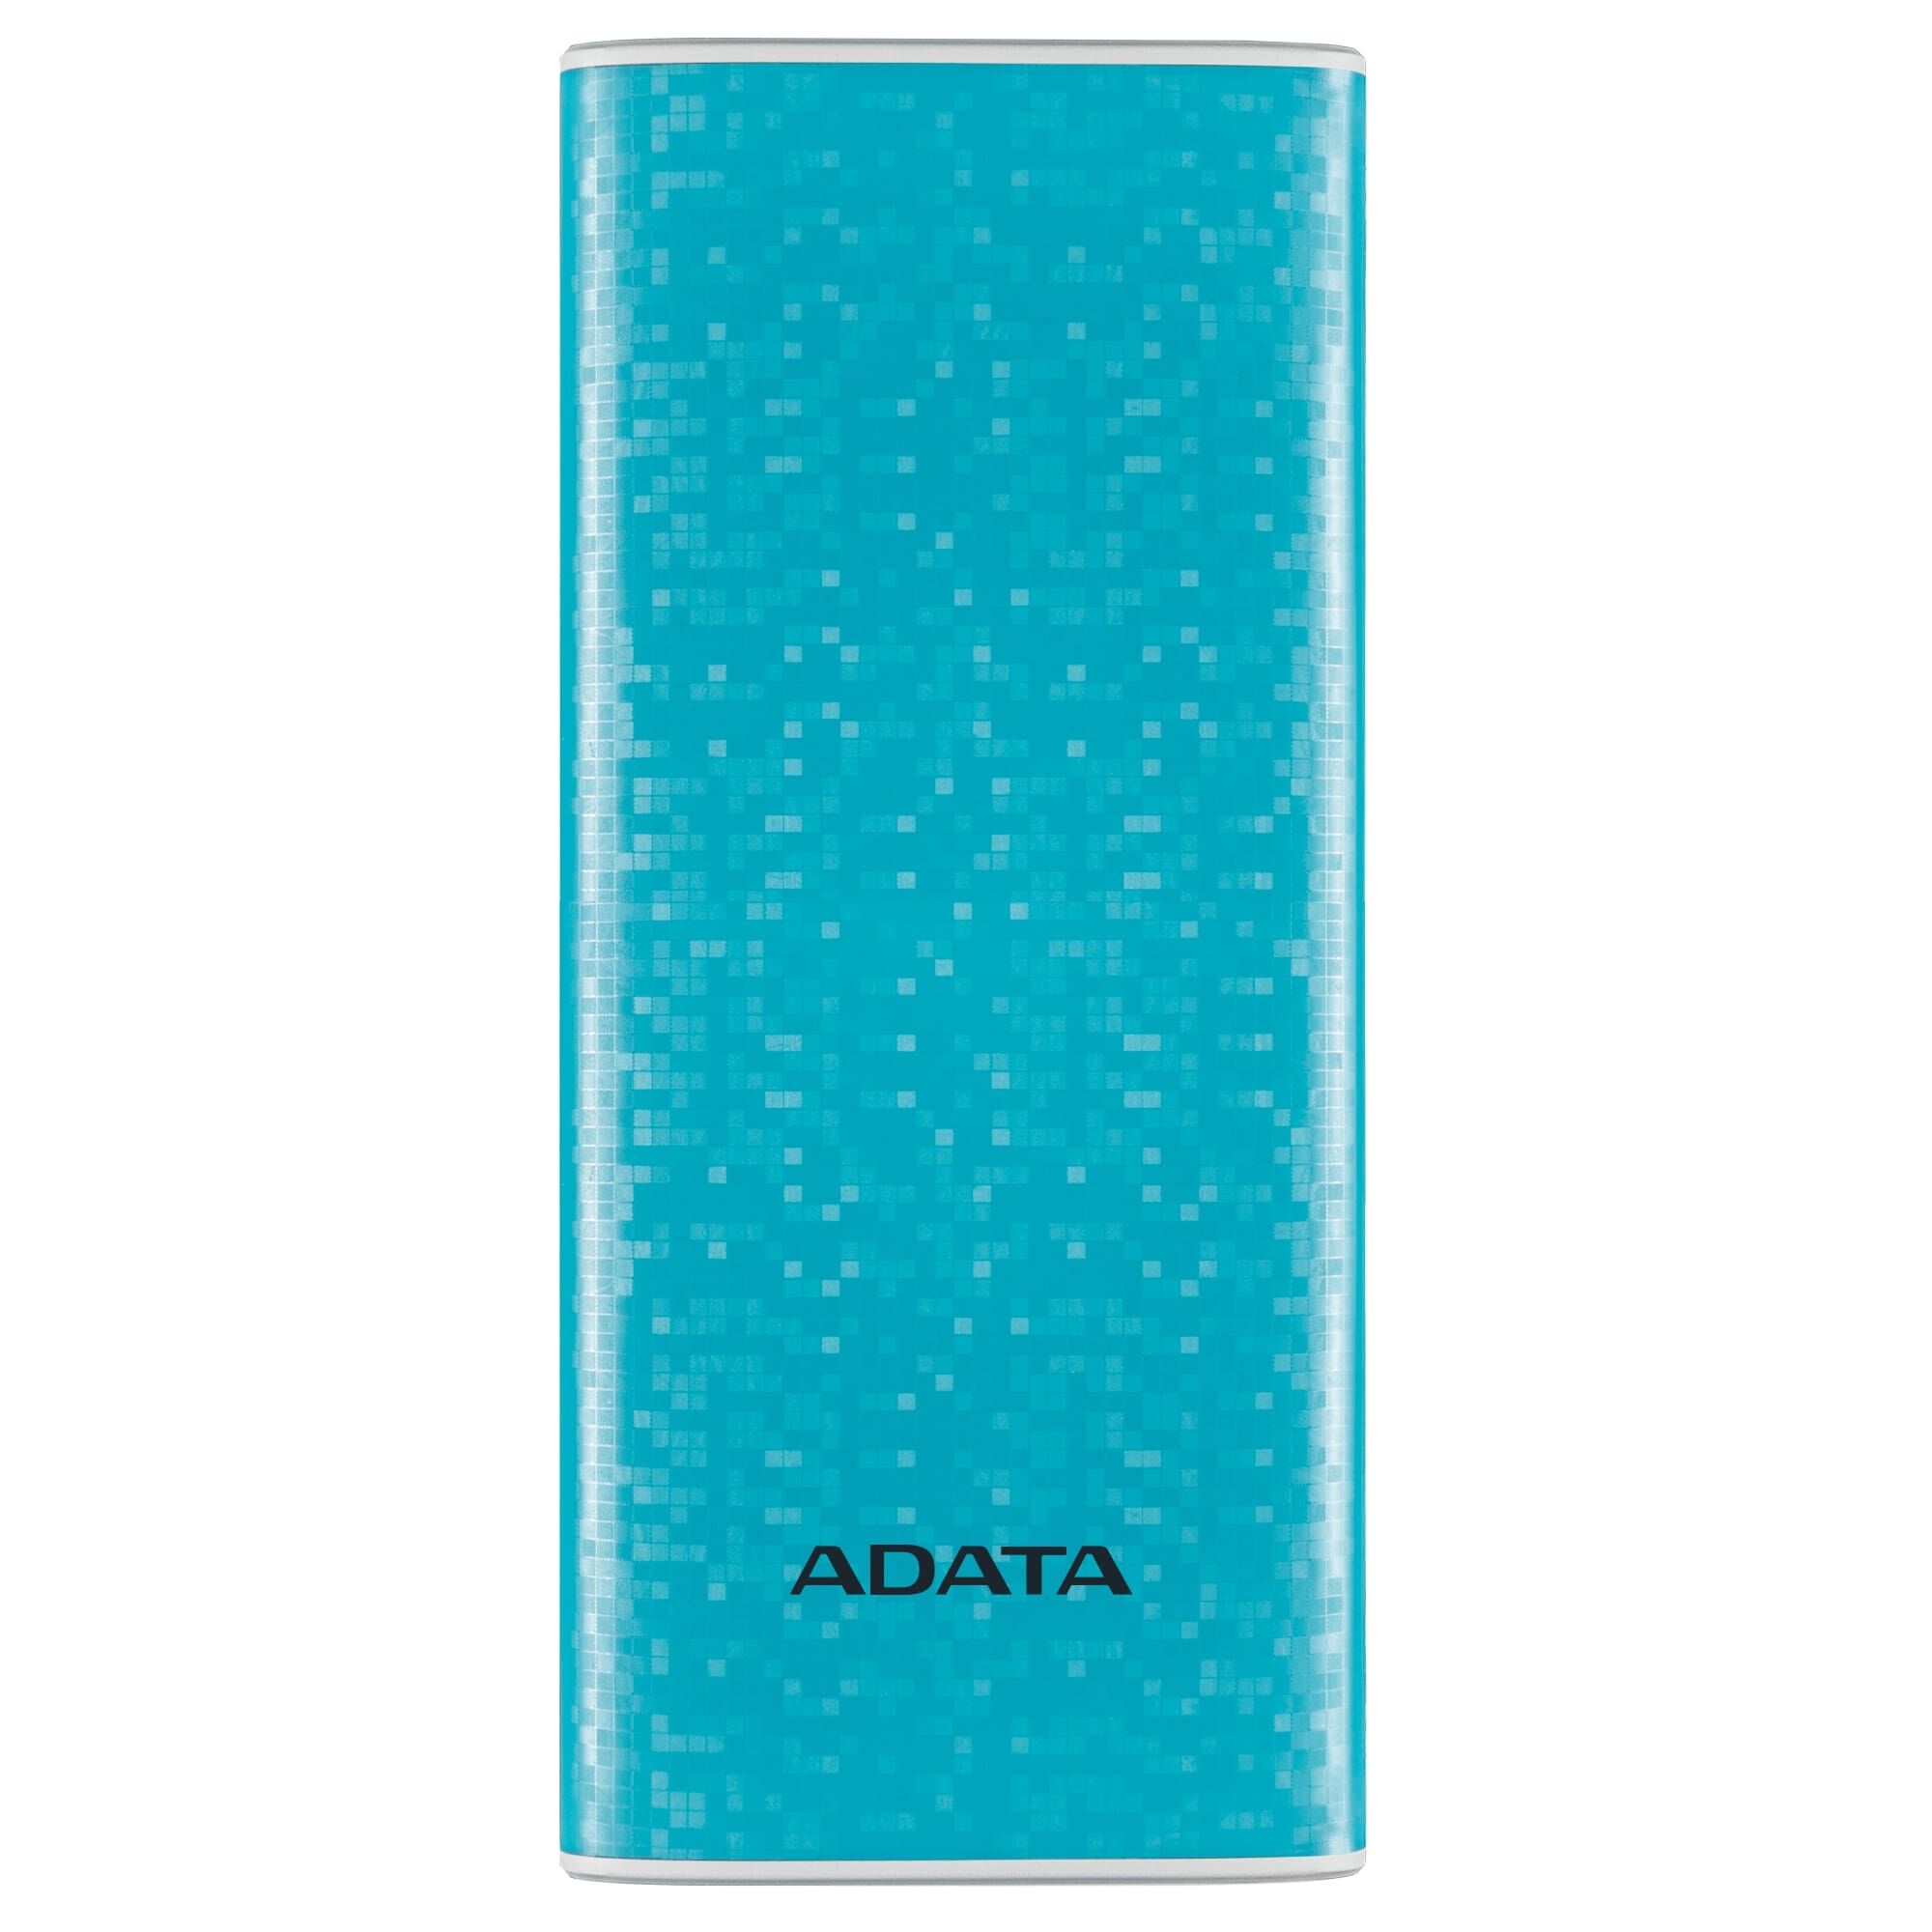 Cliqtosave: Adata P10000 Power Bank Blue | Buy Chargers & Power Banks At  Great Prices Only on Cliqtosave.com